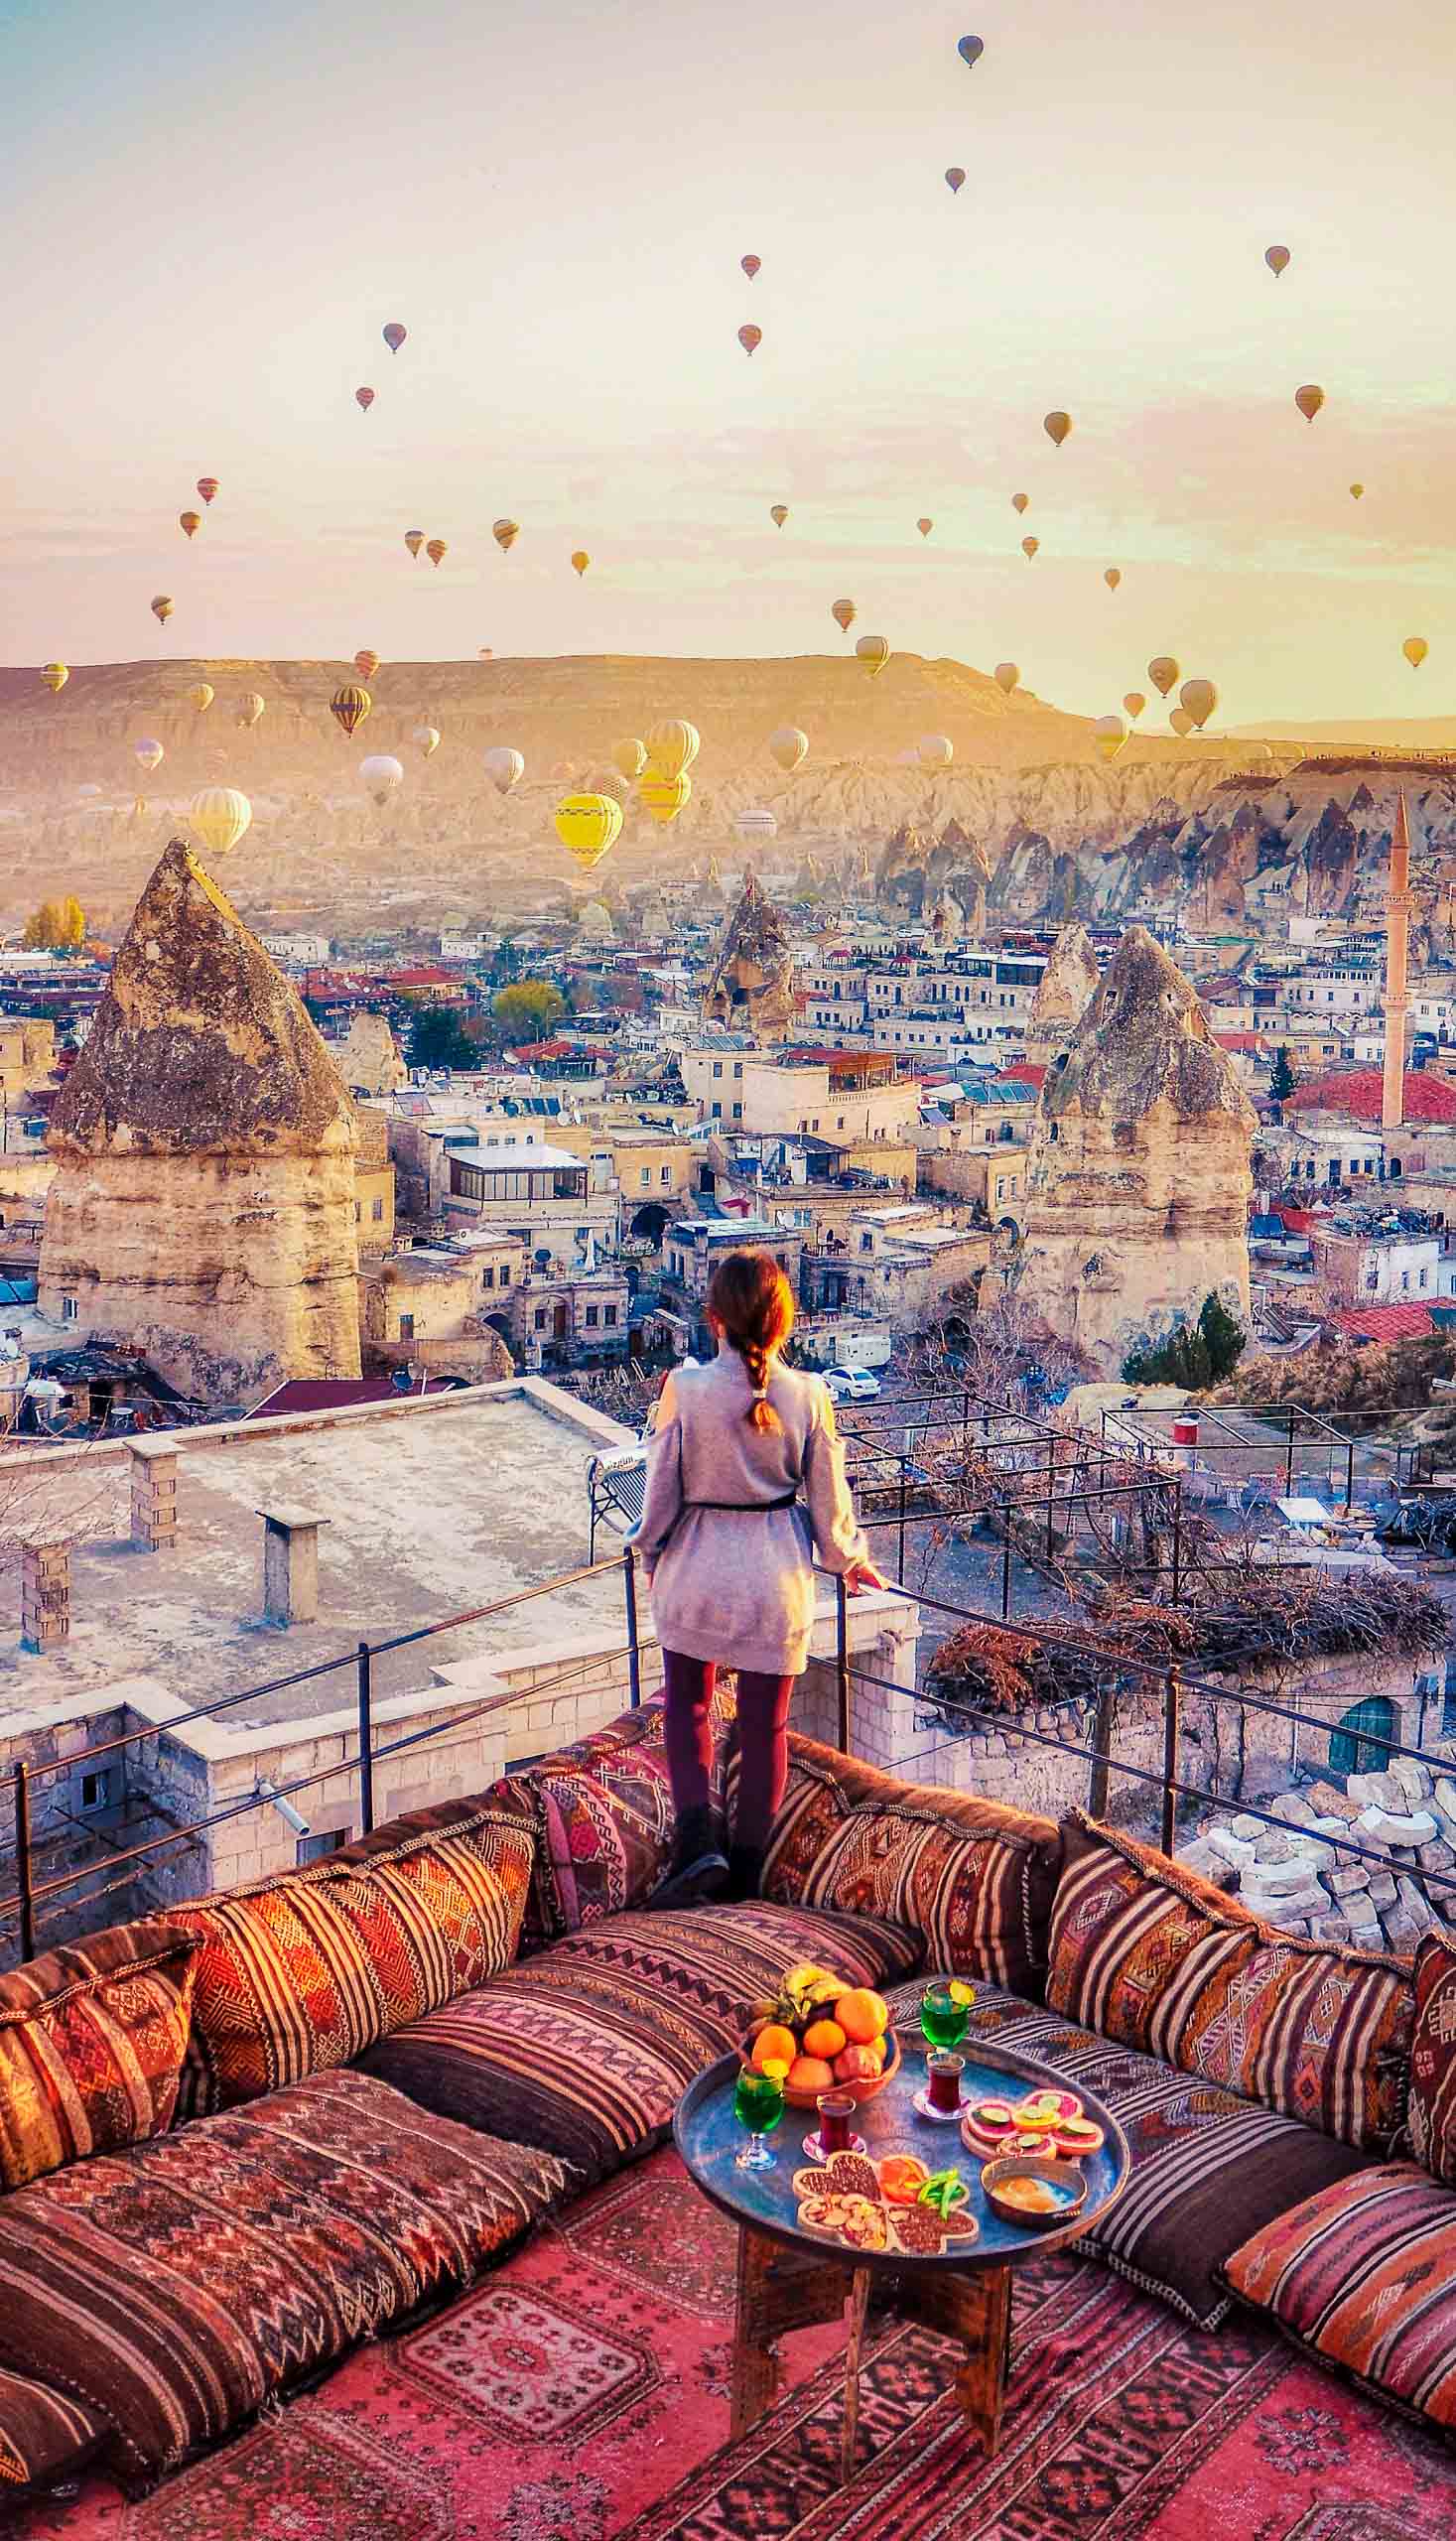 A woman stands at hotel rooftop watching hot air balloons flying over a city in Turkey.